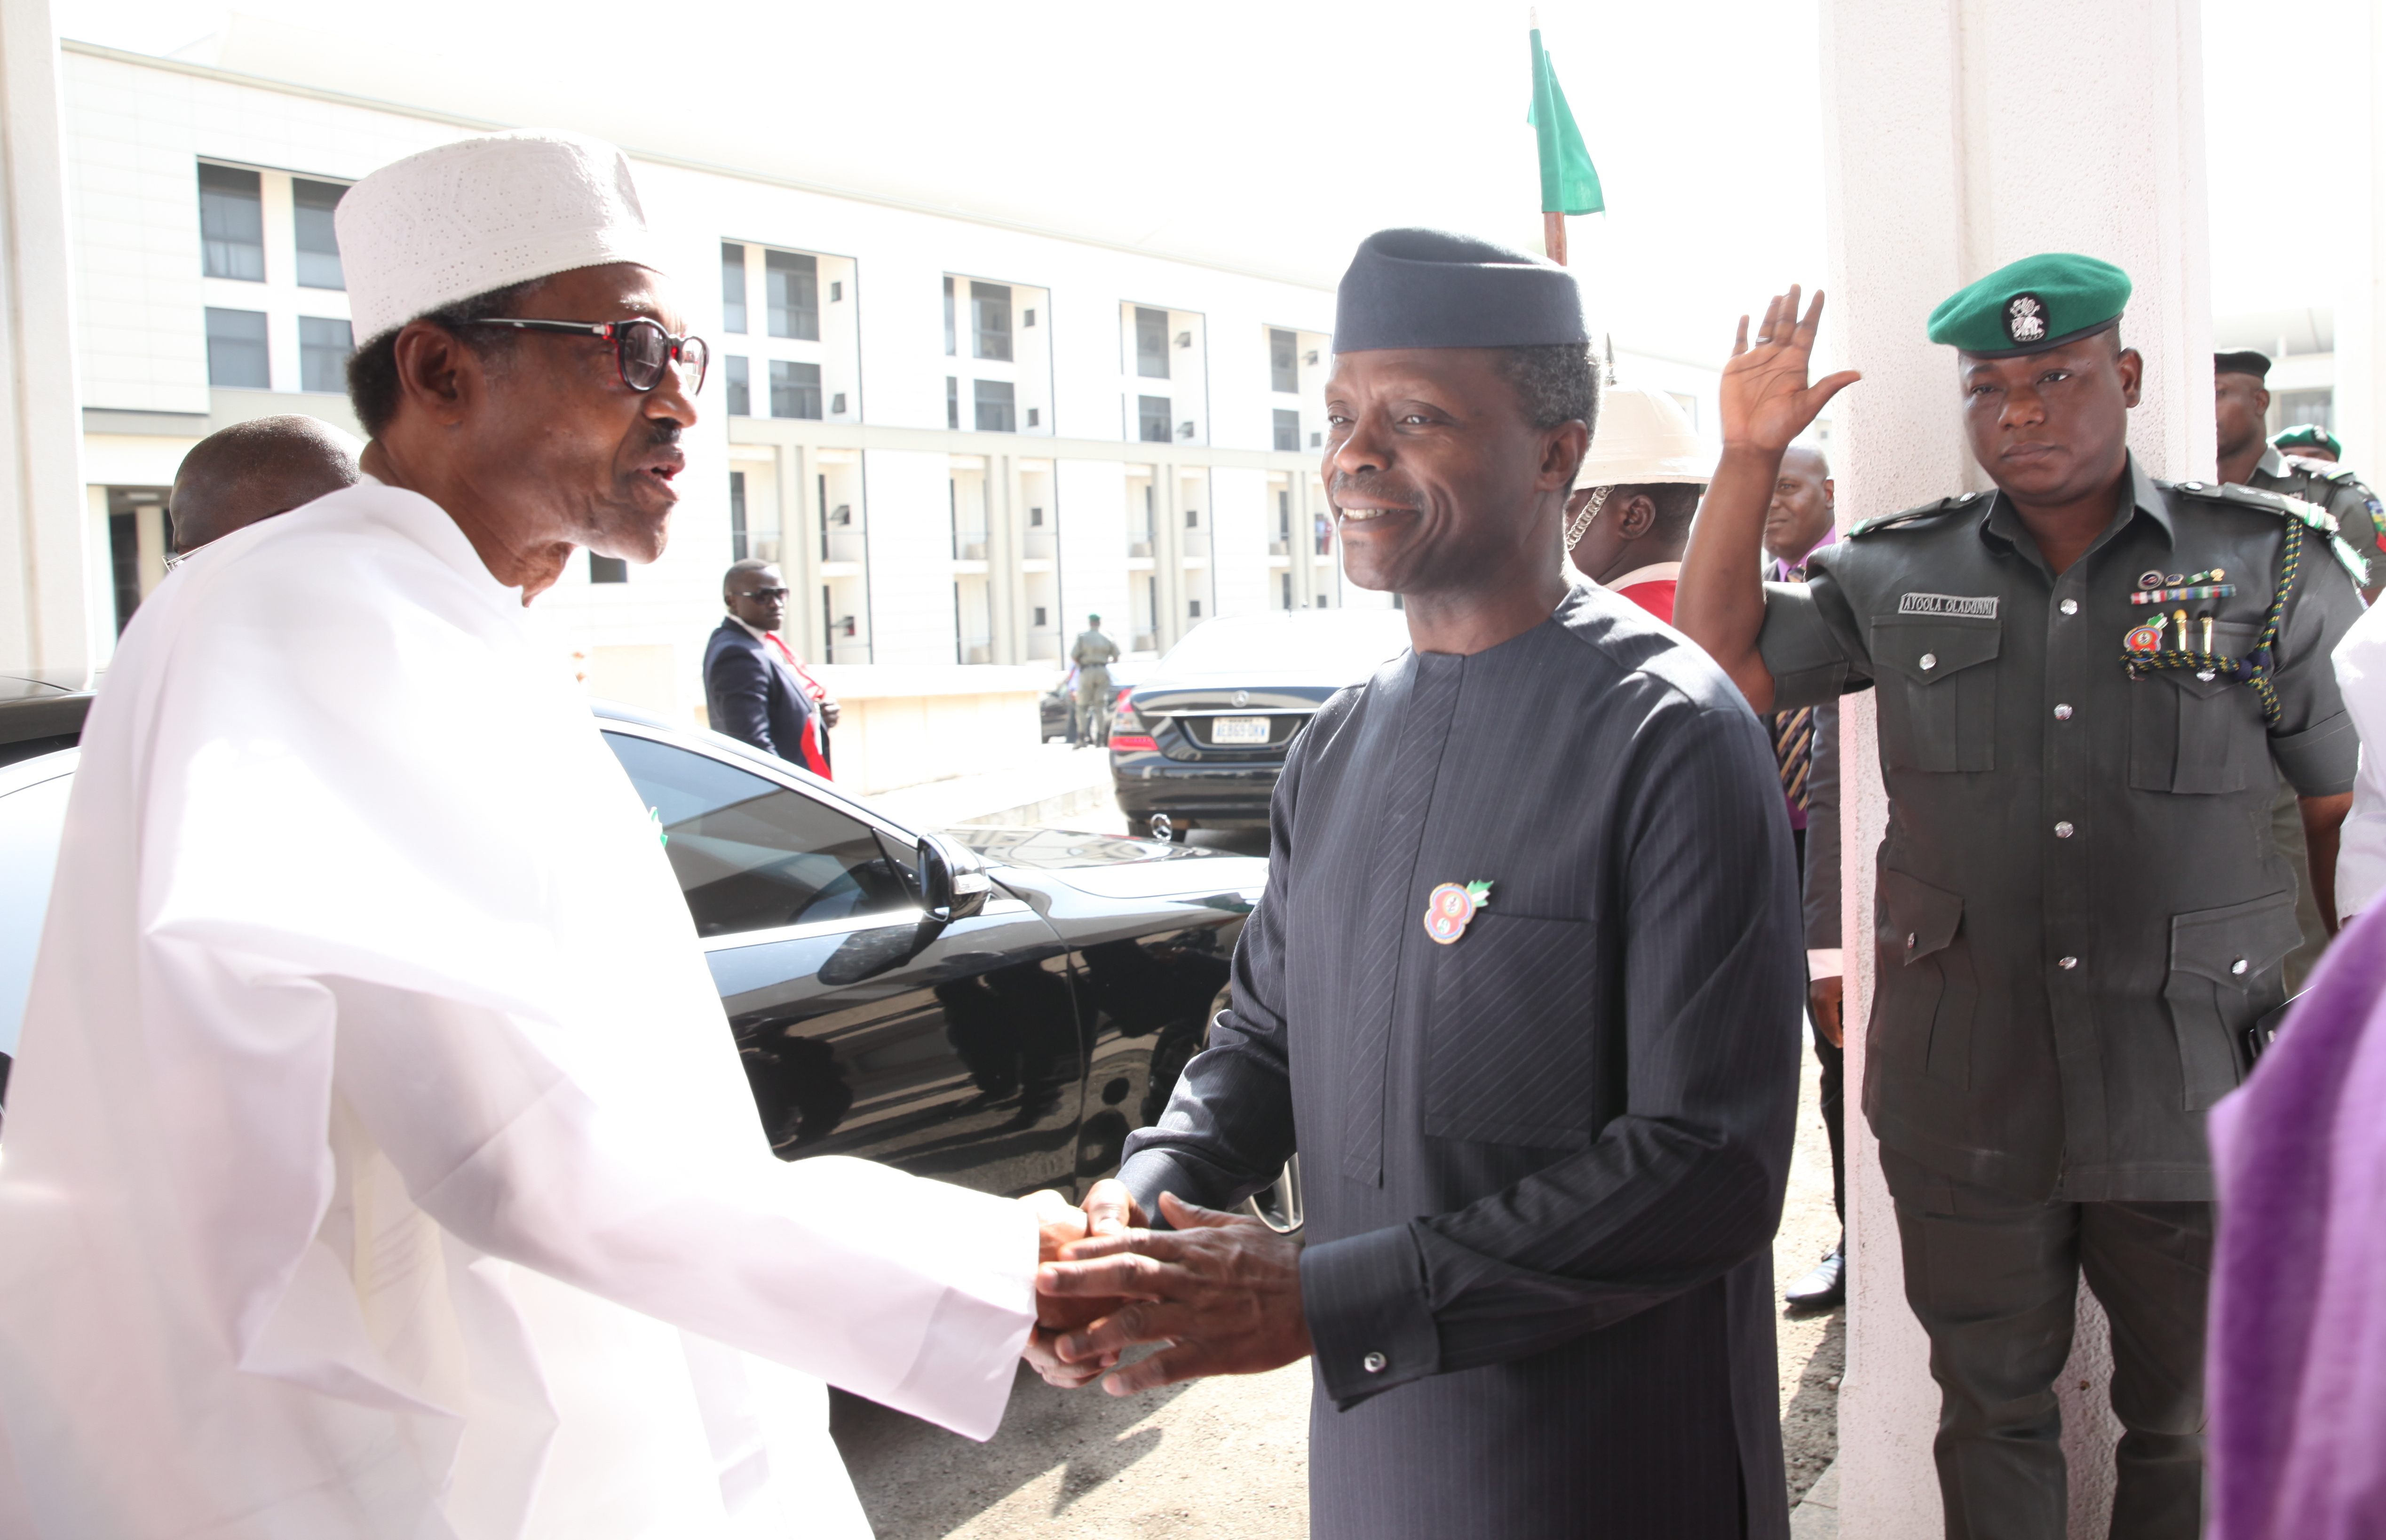 VP Osinbajo In Attendance As President Buhari Presents 2016 Budget At The National Assembly On 22/12/2015